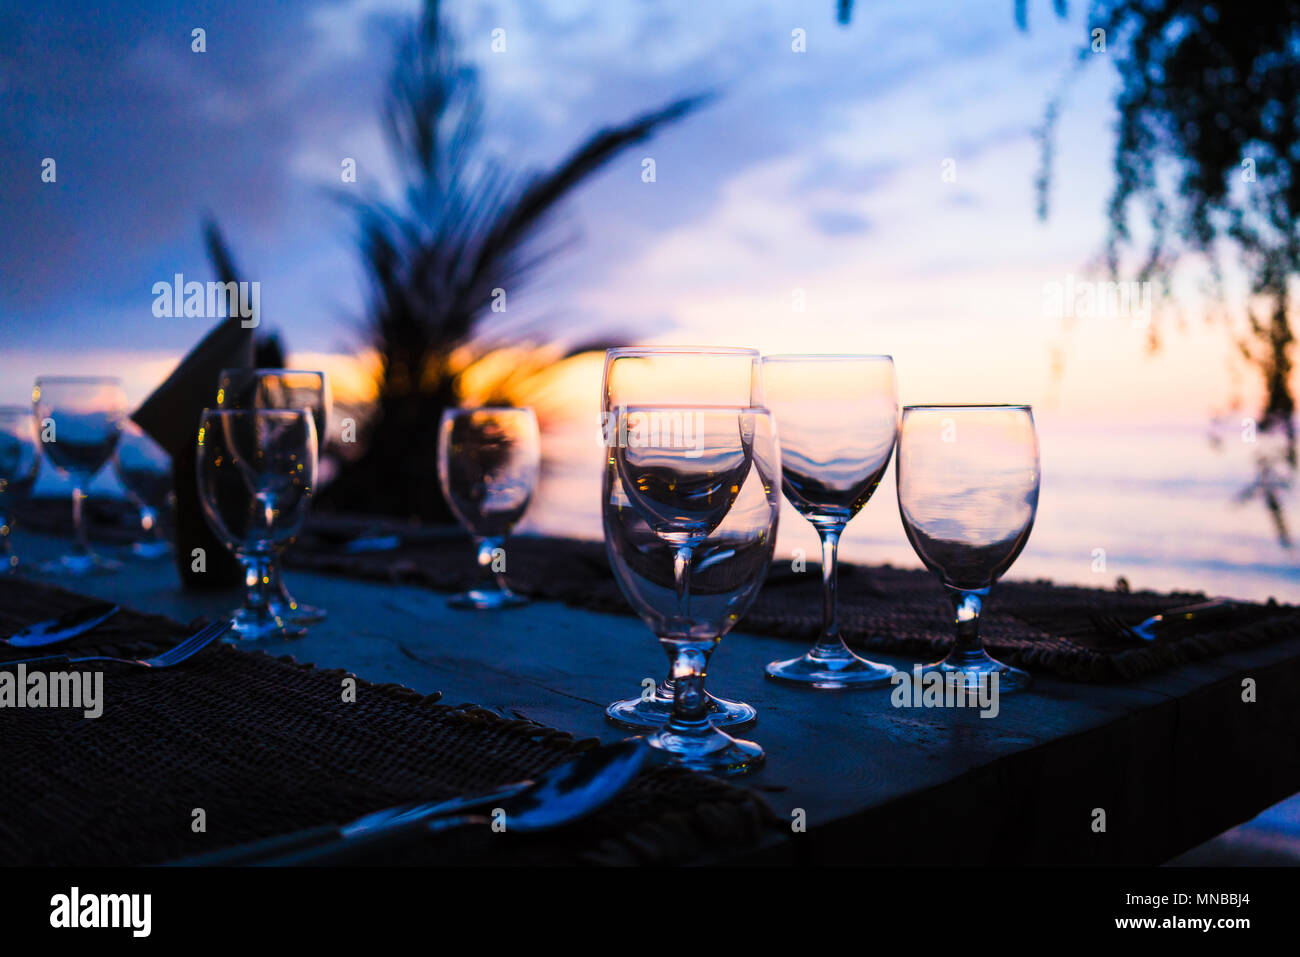 Glasses on table in tropical restaurant at sunset Stock Photo